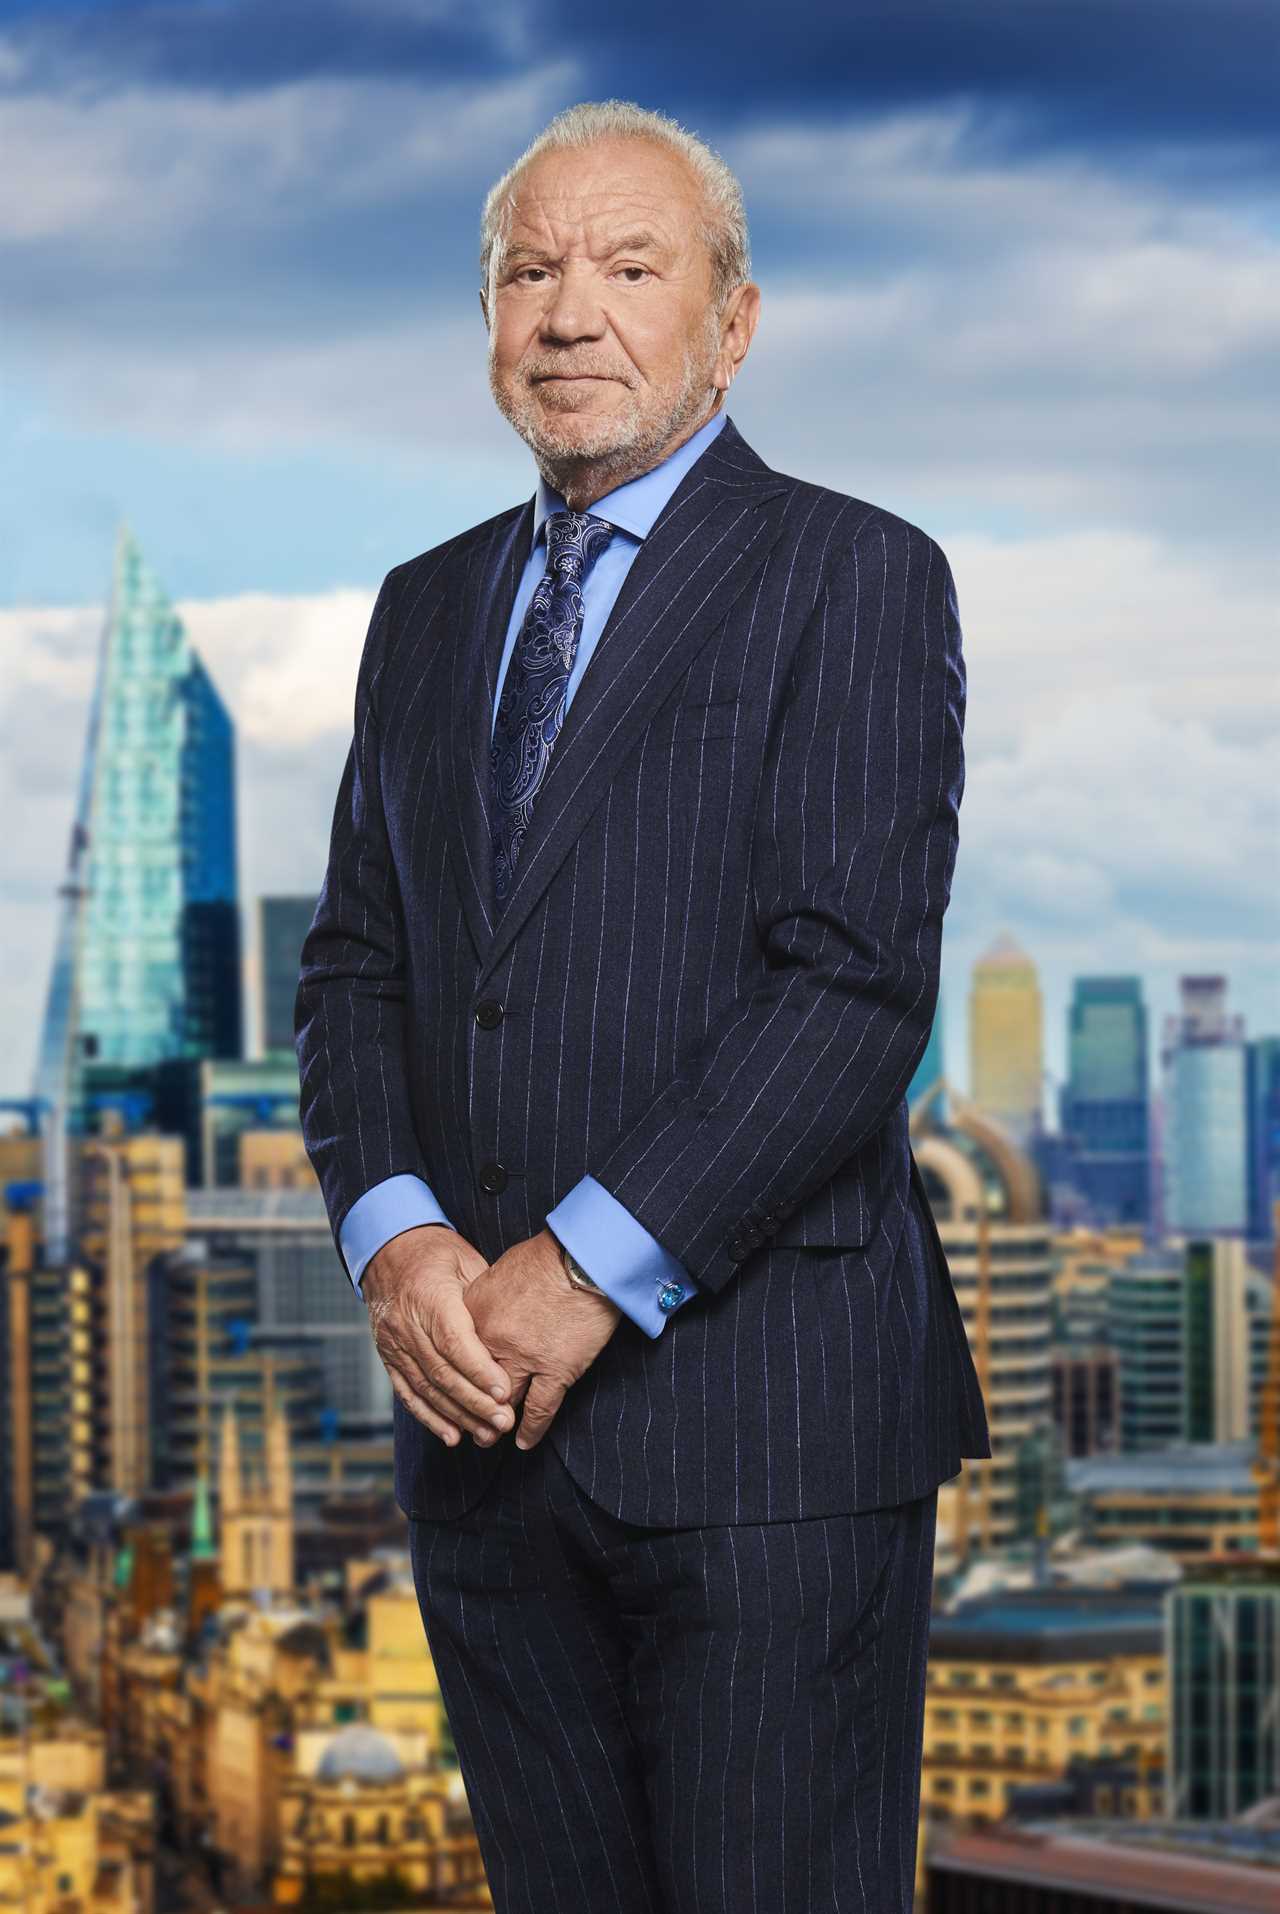 The Apprentice 2023: Meet the Finalists and Find Out When to Watch!